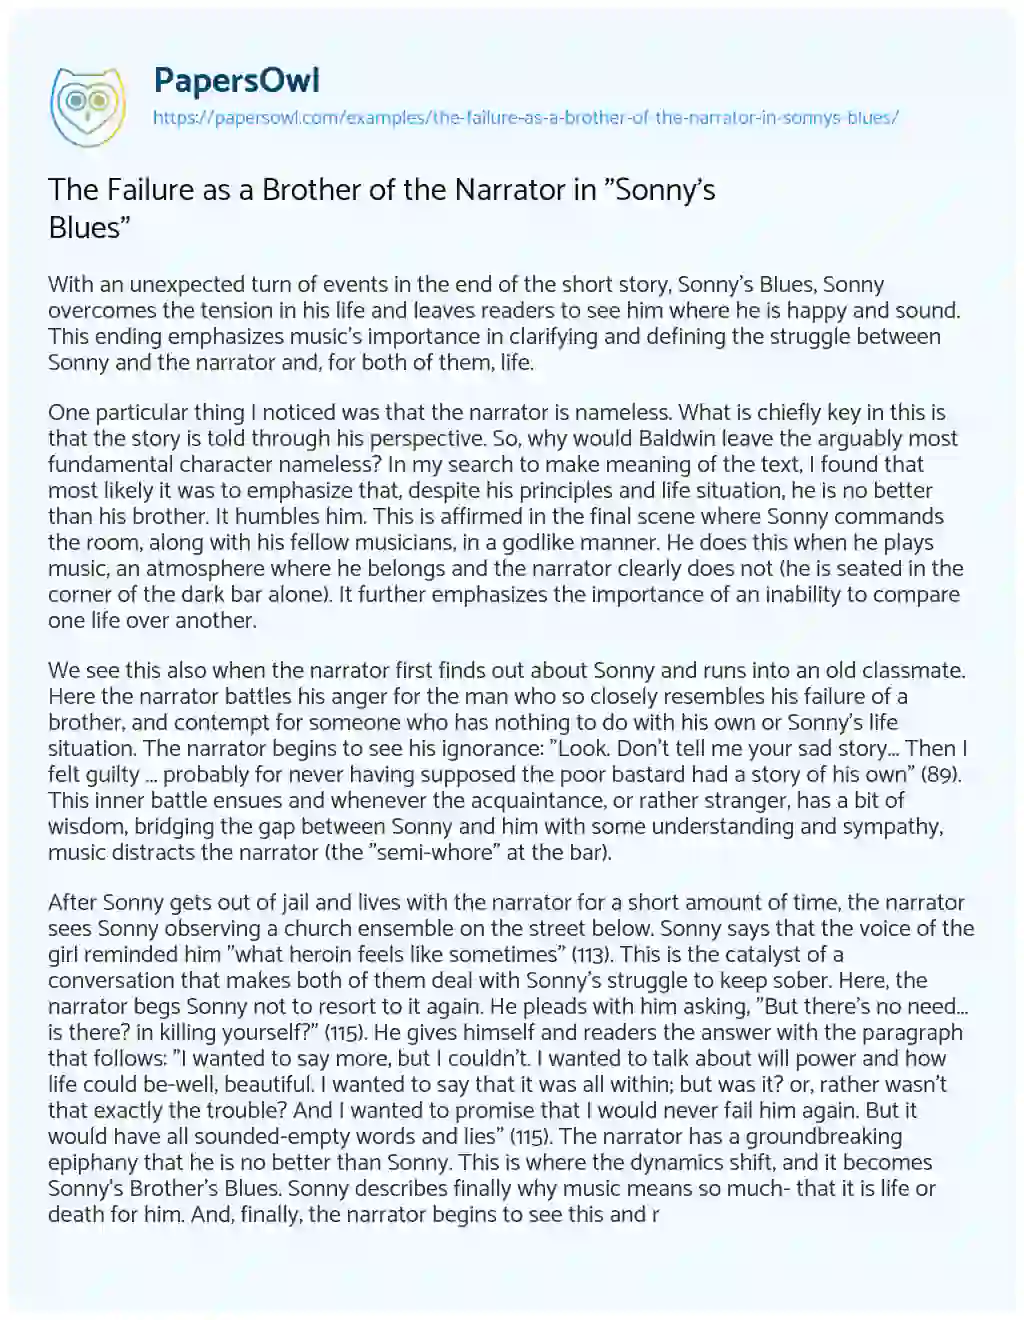 Essay on The Failure as a Brother of the Narrator in “Sonny’s Blues”